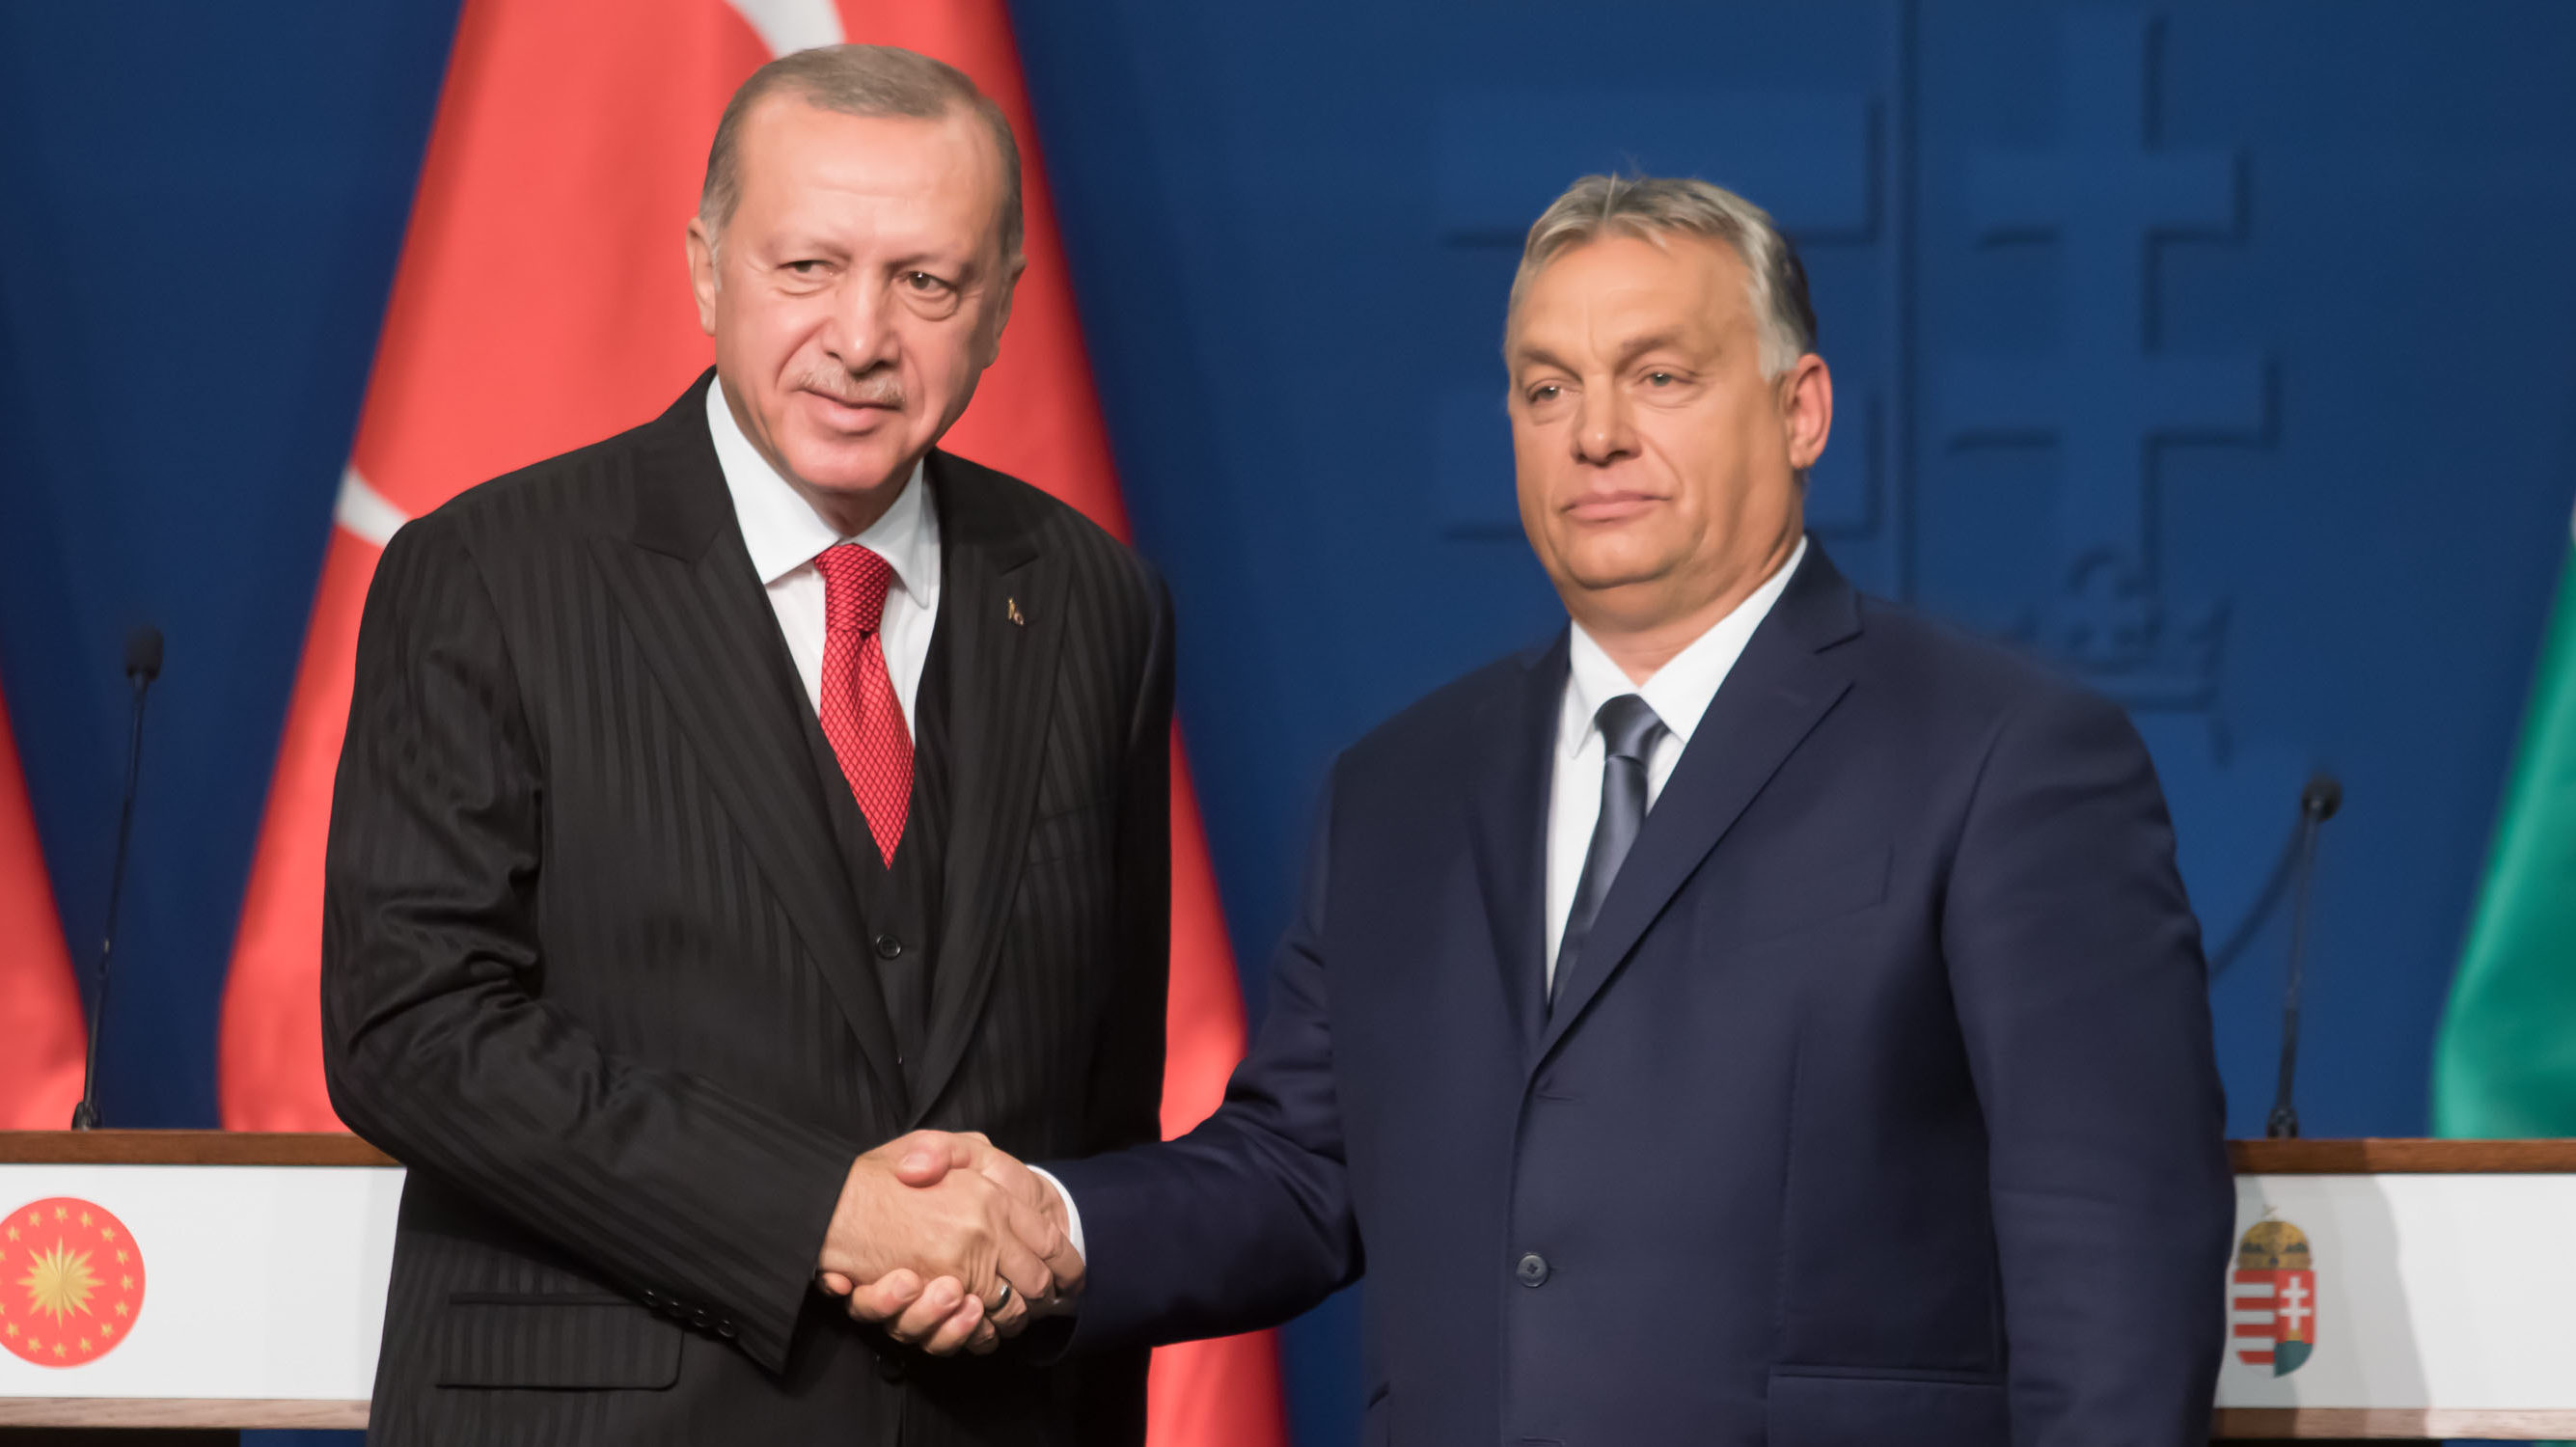 Turkey Finds Ally in Hungary as Both Move Closer to Russia